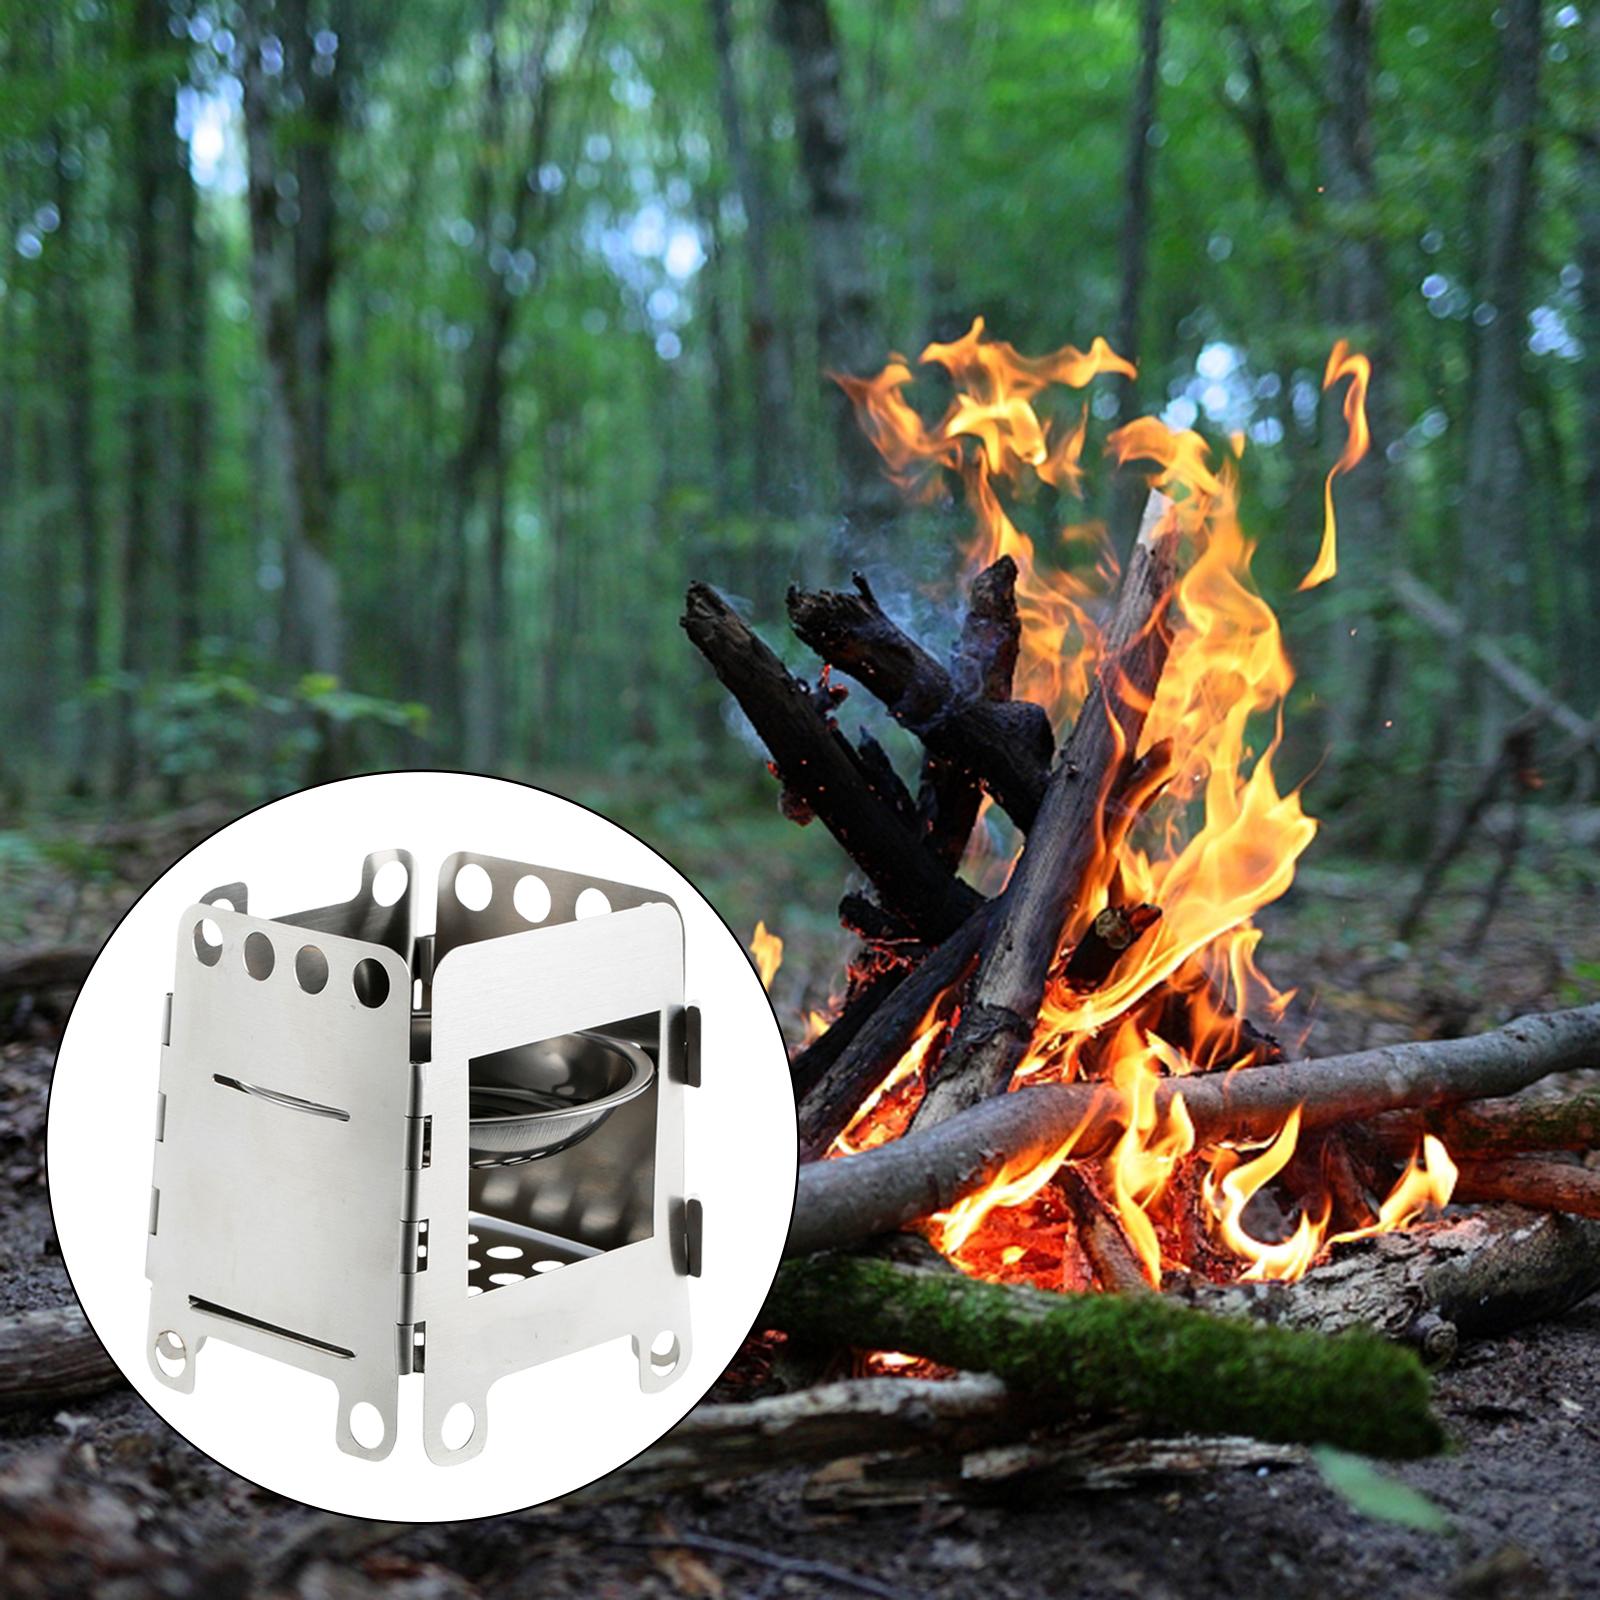 Camping Firewood Alcohol Outdoor Cooking Grill for Hiking Travel